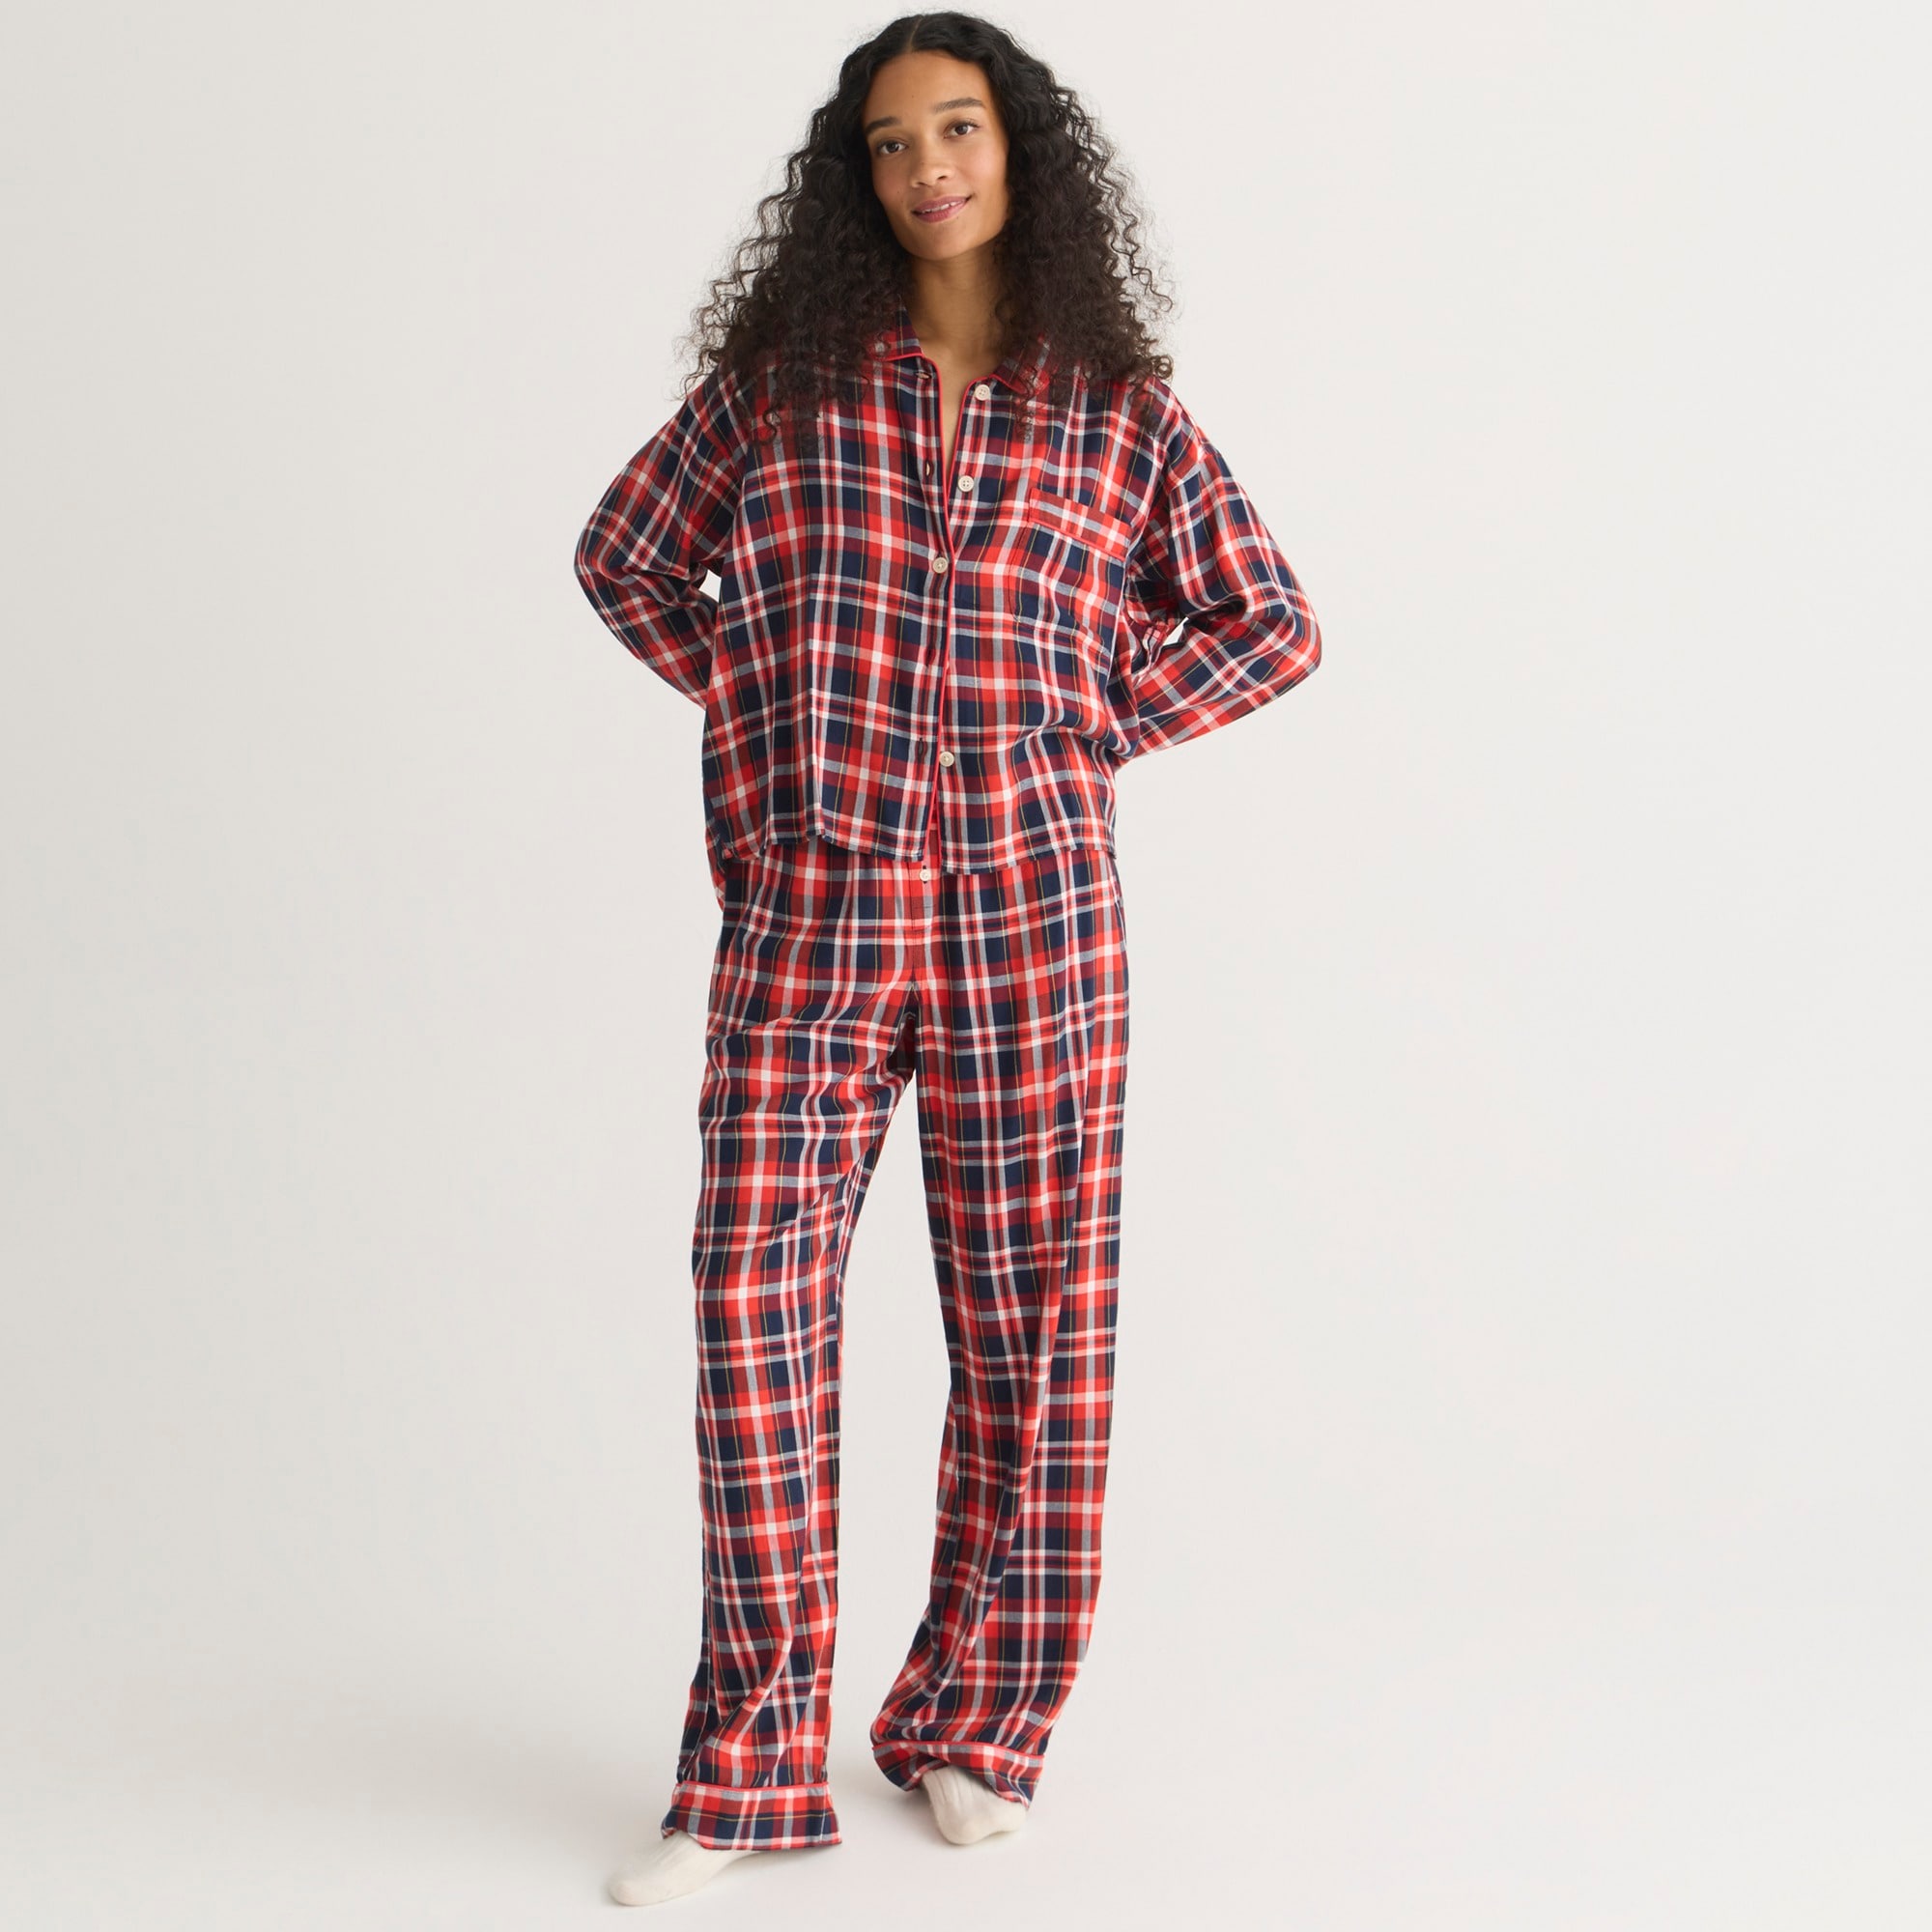 Jcrew Flannel long-sleeve cropped pajama pant set in plaid